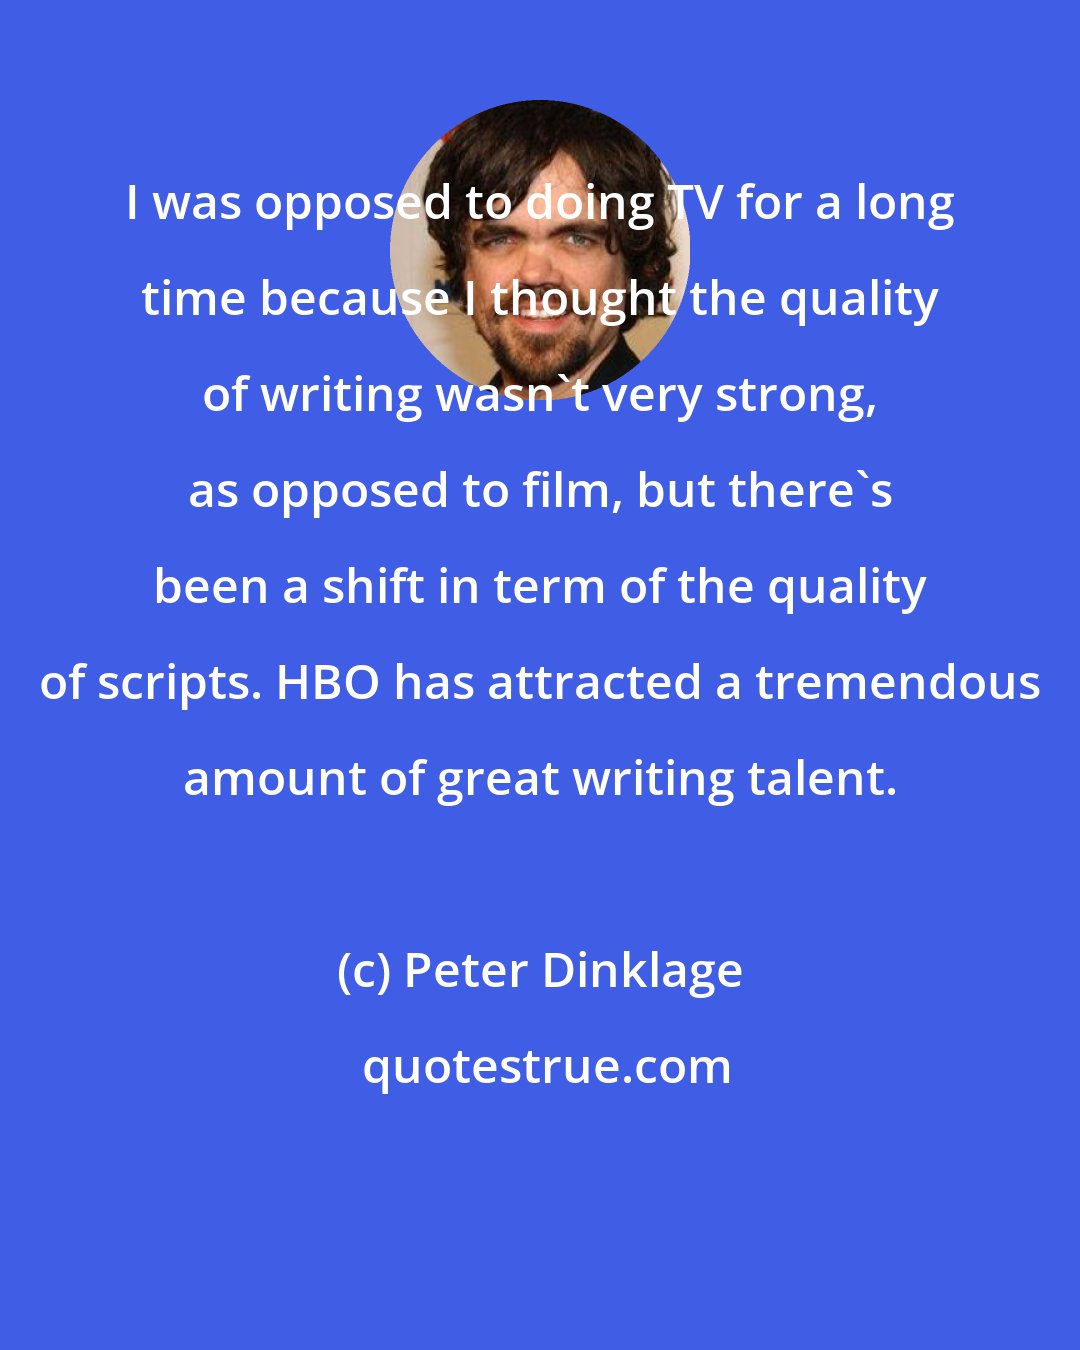 Peter Dinklage: I was opposed to doing TV for a long time because I thought the quality of writing wasn't very strong, as opposed to film, but there's been a shift in term of the quality of scripts. HBO has attracted a tremendous amount of great writing talent.